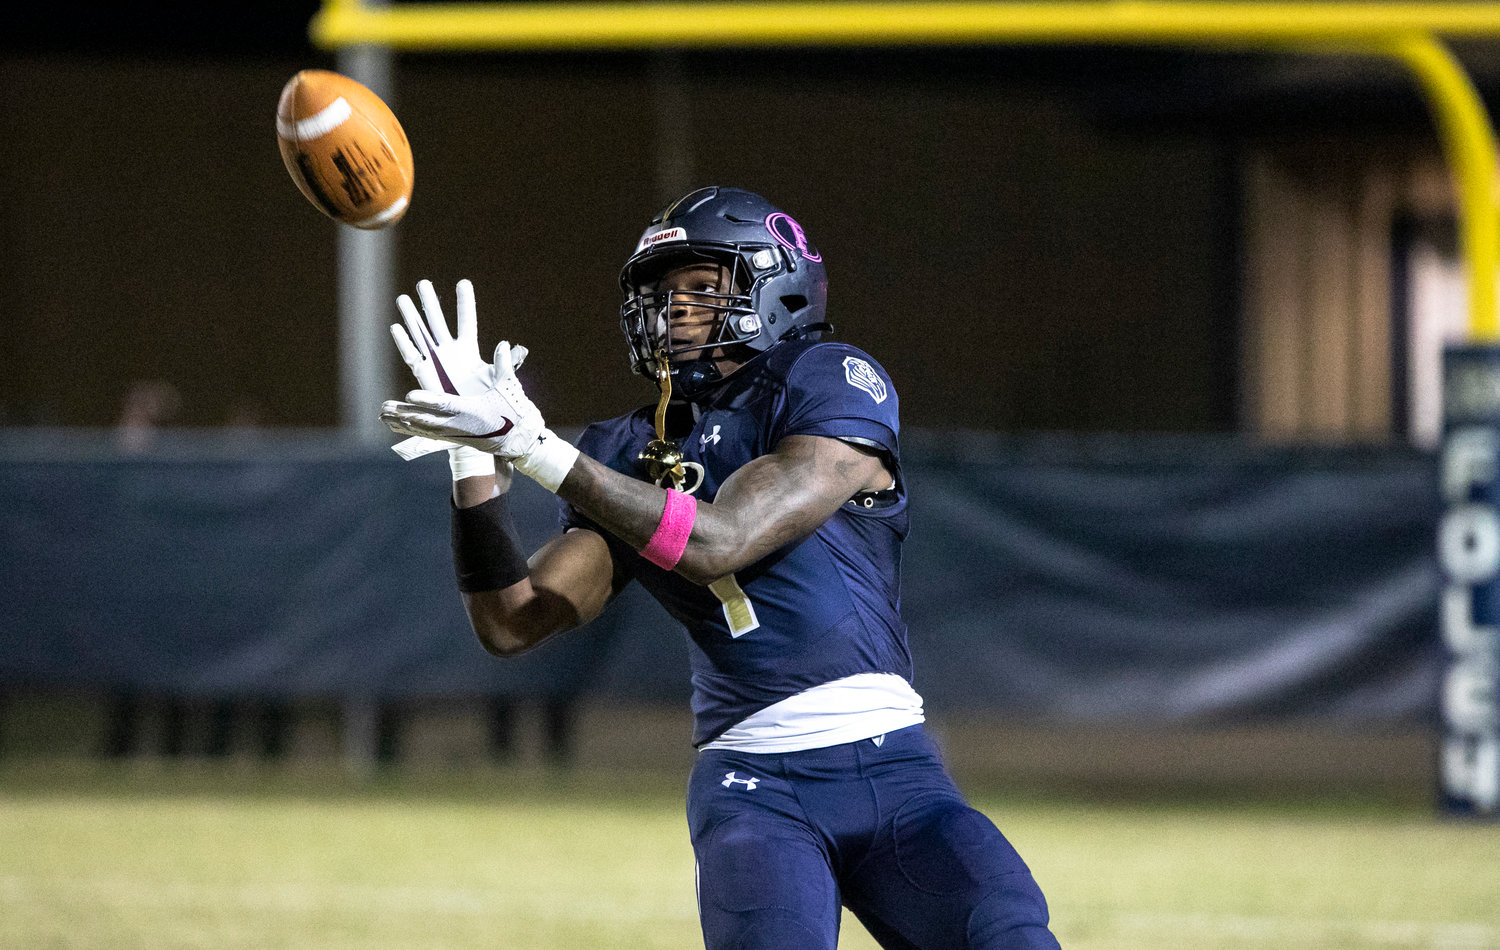 Foley junior Perry Thompson looks in a punt during the Lions’ Class 7A Region 1 game against the Daphne Trojans at Ivan Jones Stadium Oct. 21, 2022. Thompson was one of 16 Foley Lions named all-county by Baldwin County Public Schools.